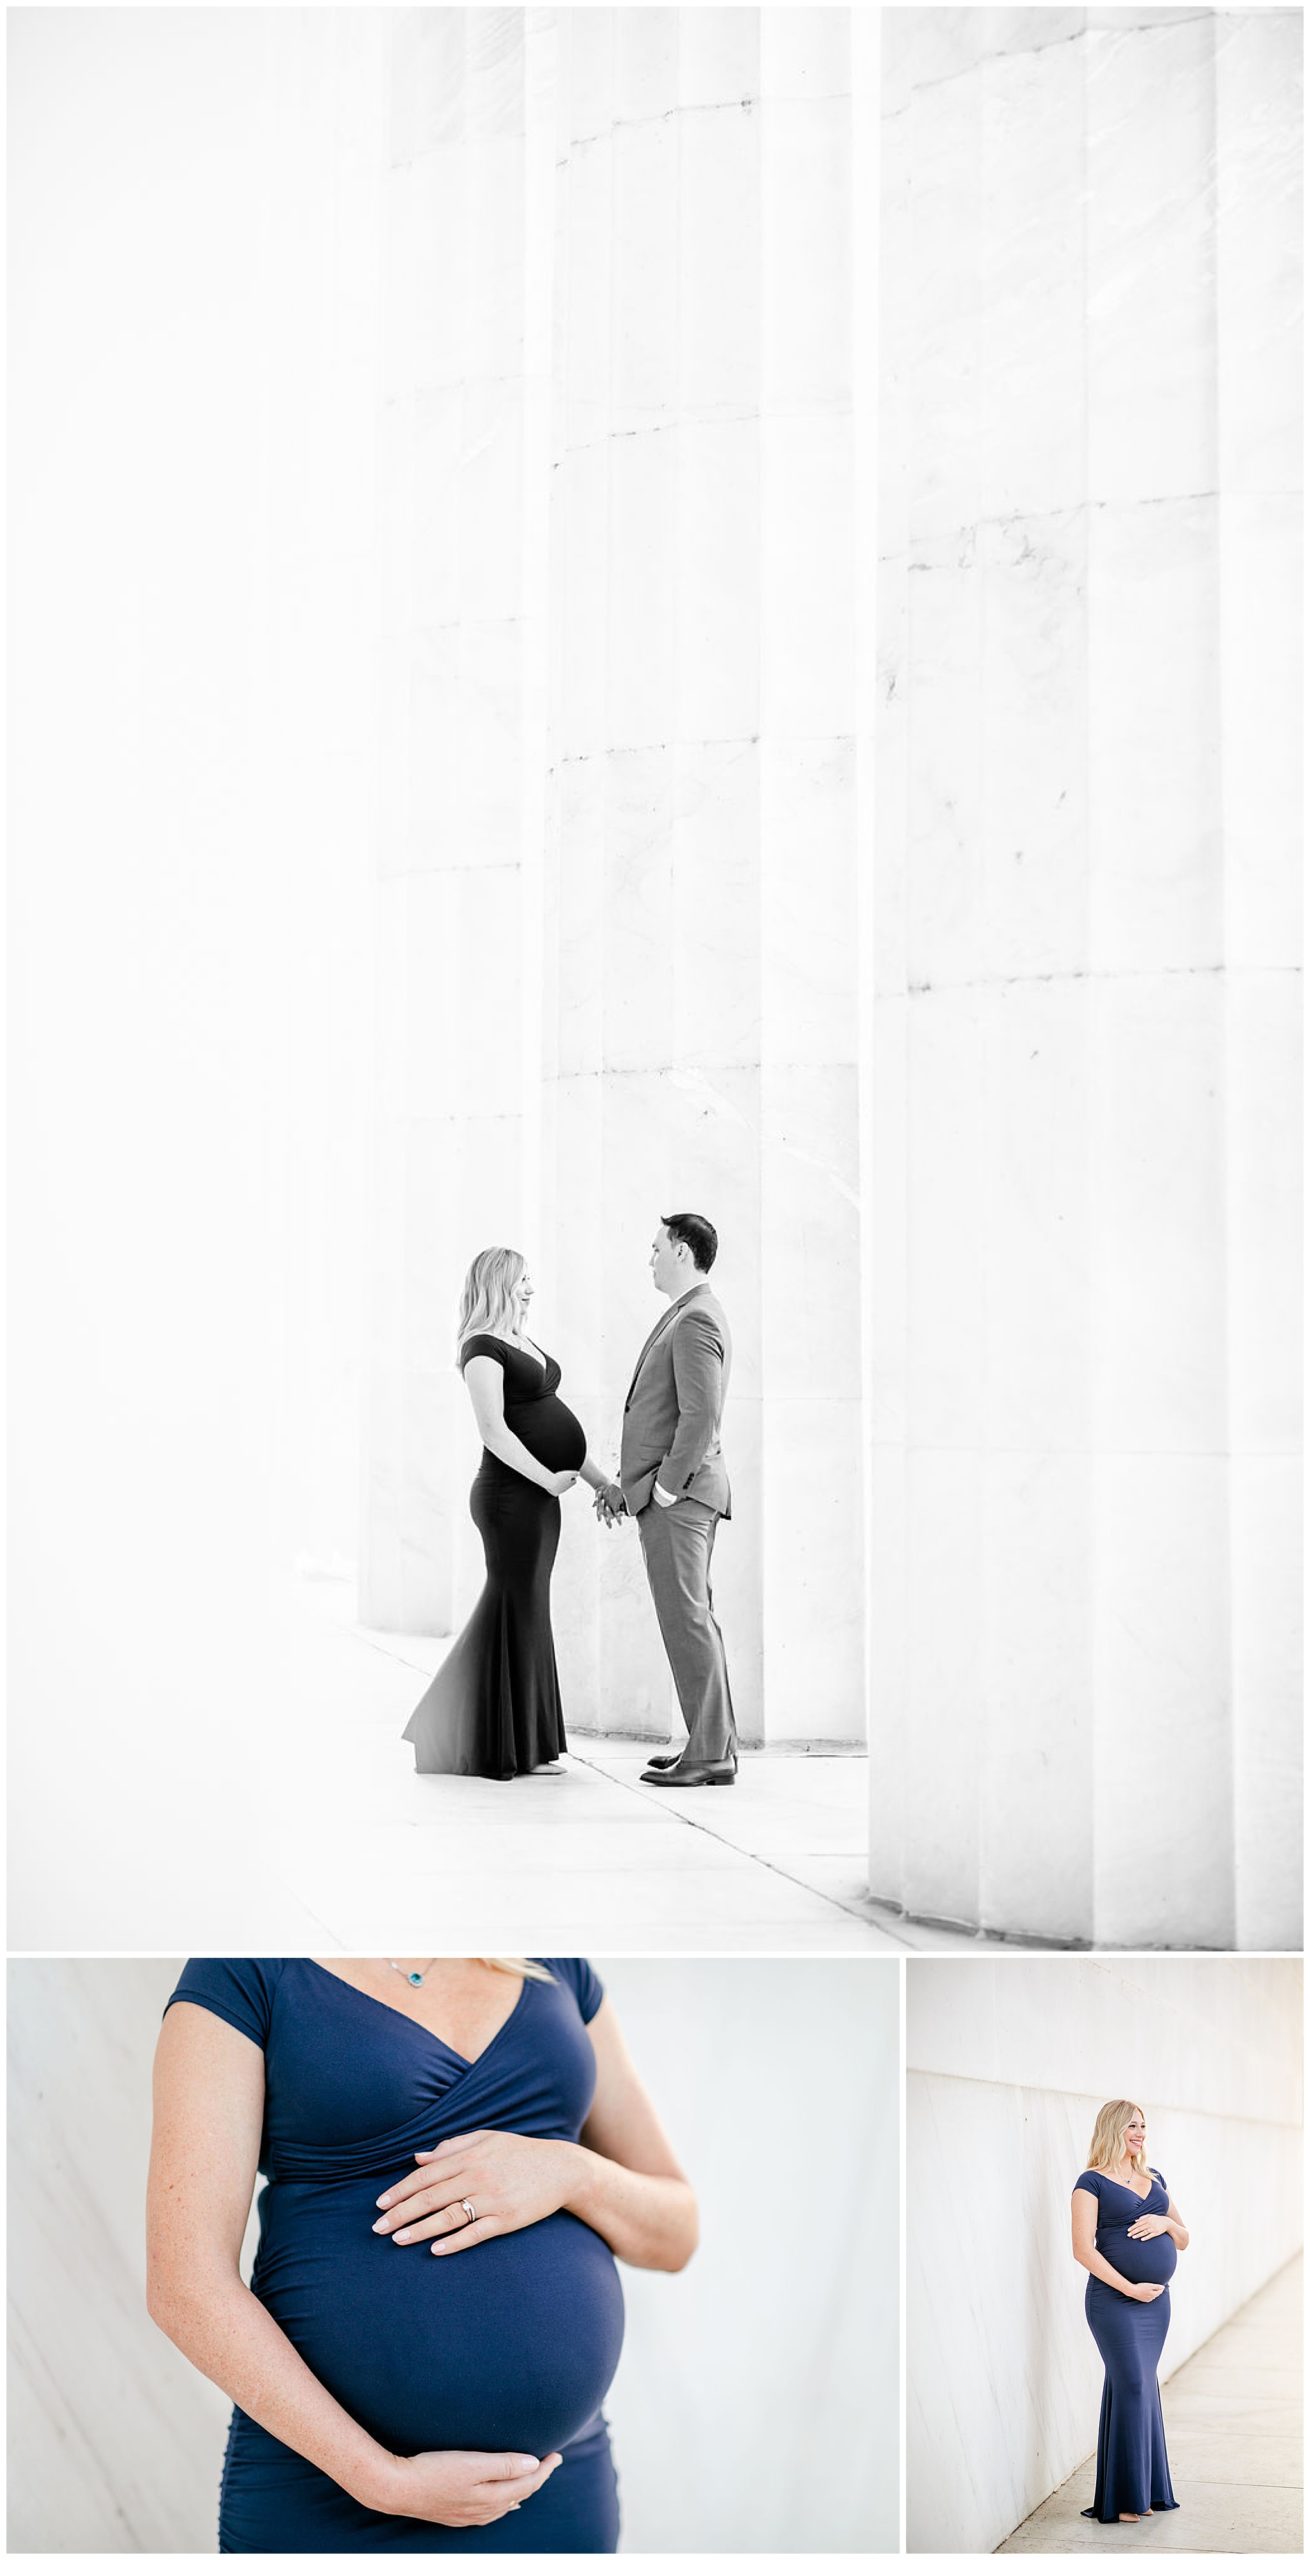 National Mall maternity photos, Lincoln Memorial maternity photos, Constitution Gardens maternity photos, DC maternity photos, DC maternity photographer, classic DC portraits, pregnant couple, natural light maternity photos, Rachel E.H. Photography, black and white, couple looking at each other, pregnant woman's belly